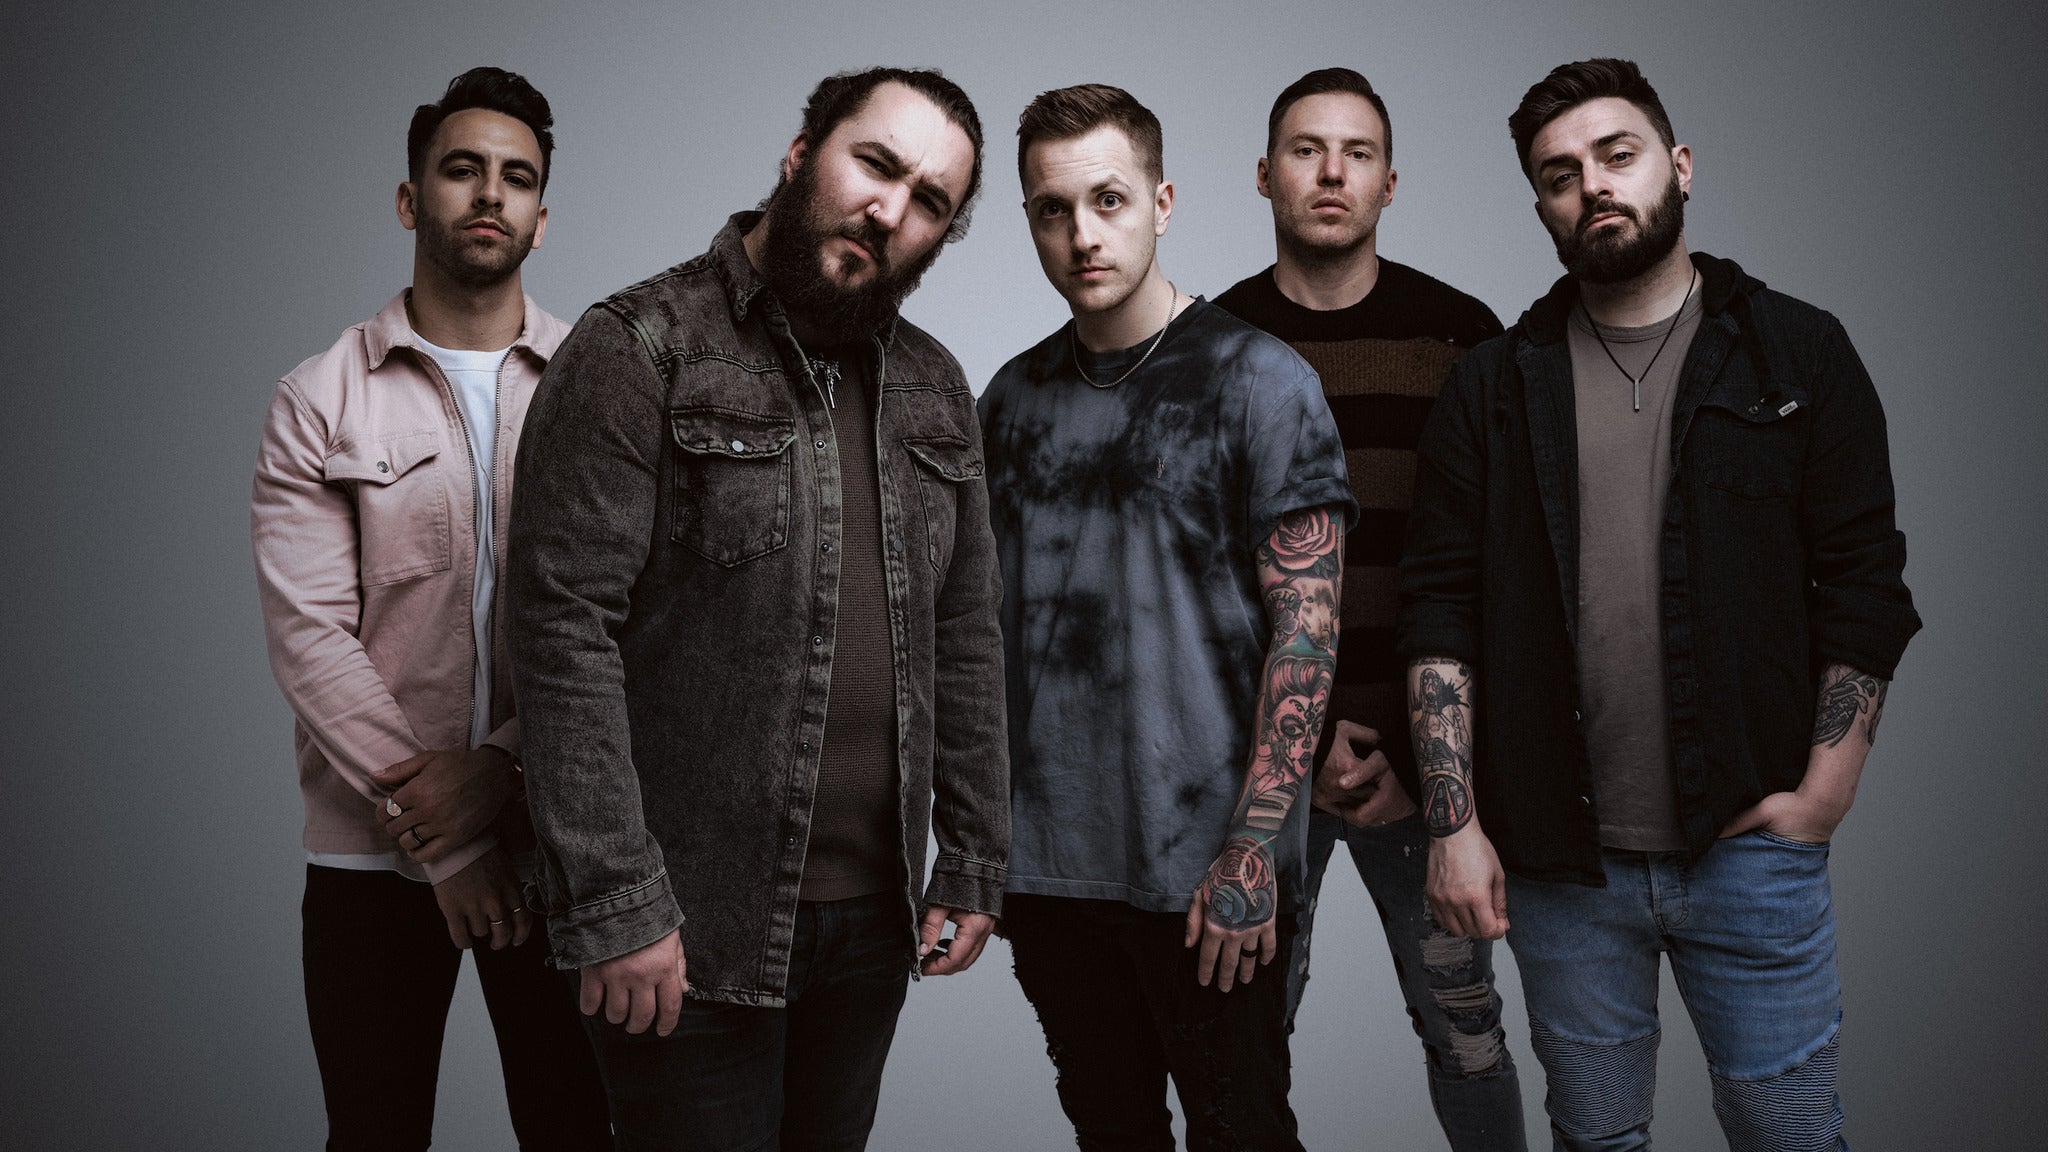 I Prevail: True Power Tour in Reno event information